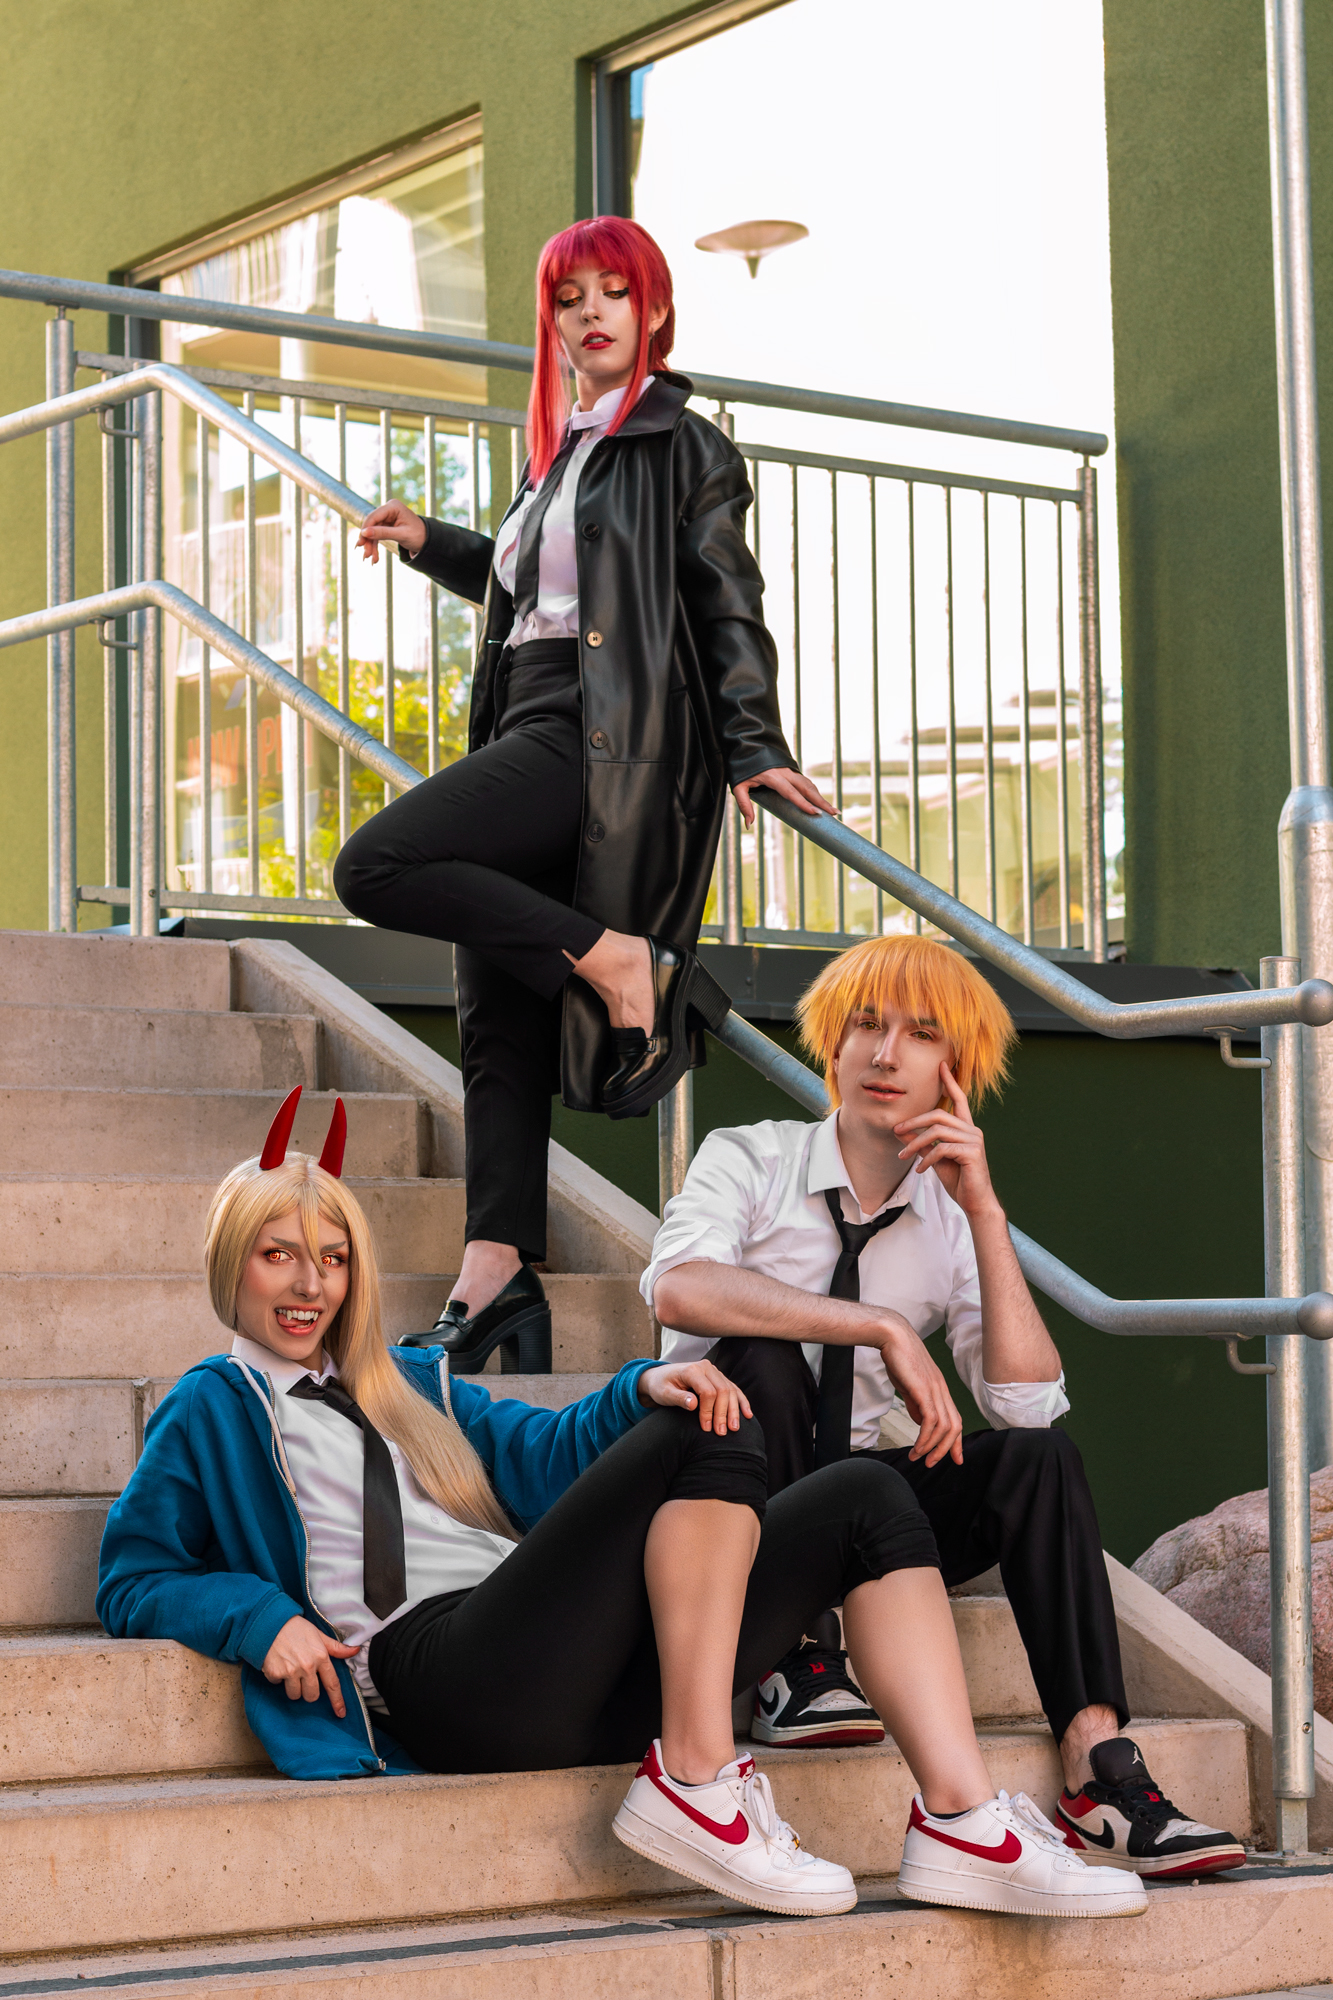 Chainsaw man cosplay group by Andivicosplay on DeviantArt